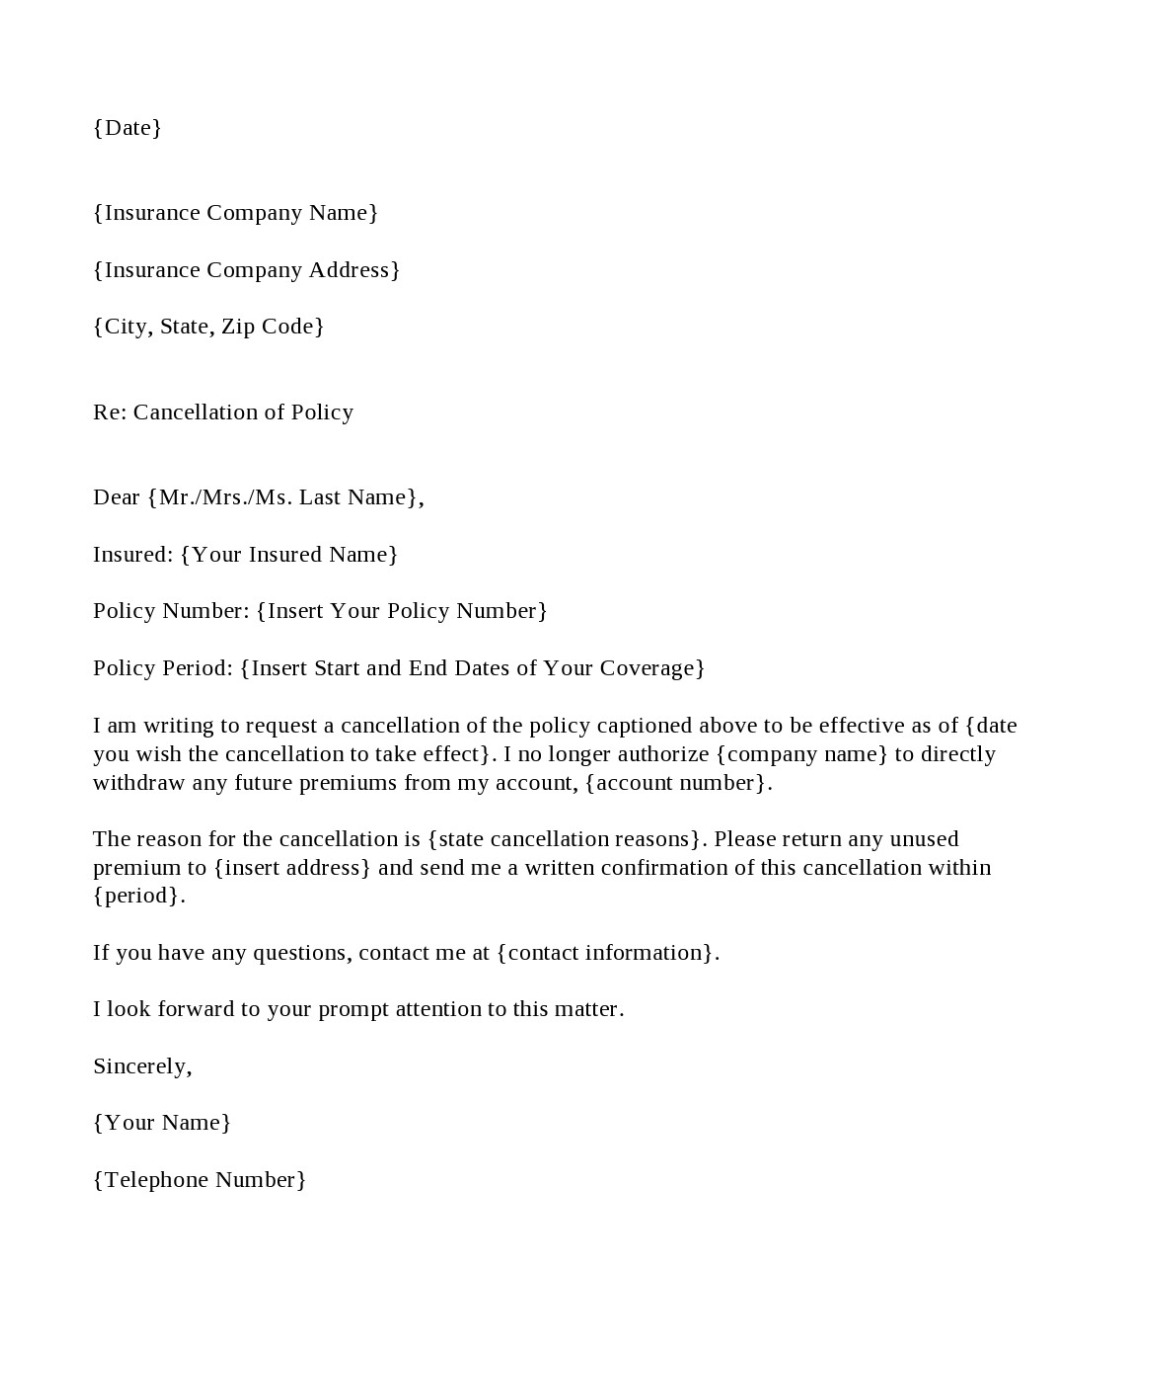 insurance request cancellation letter template